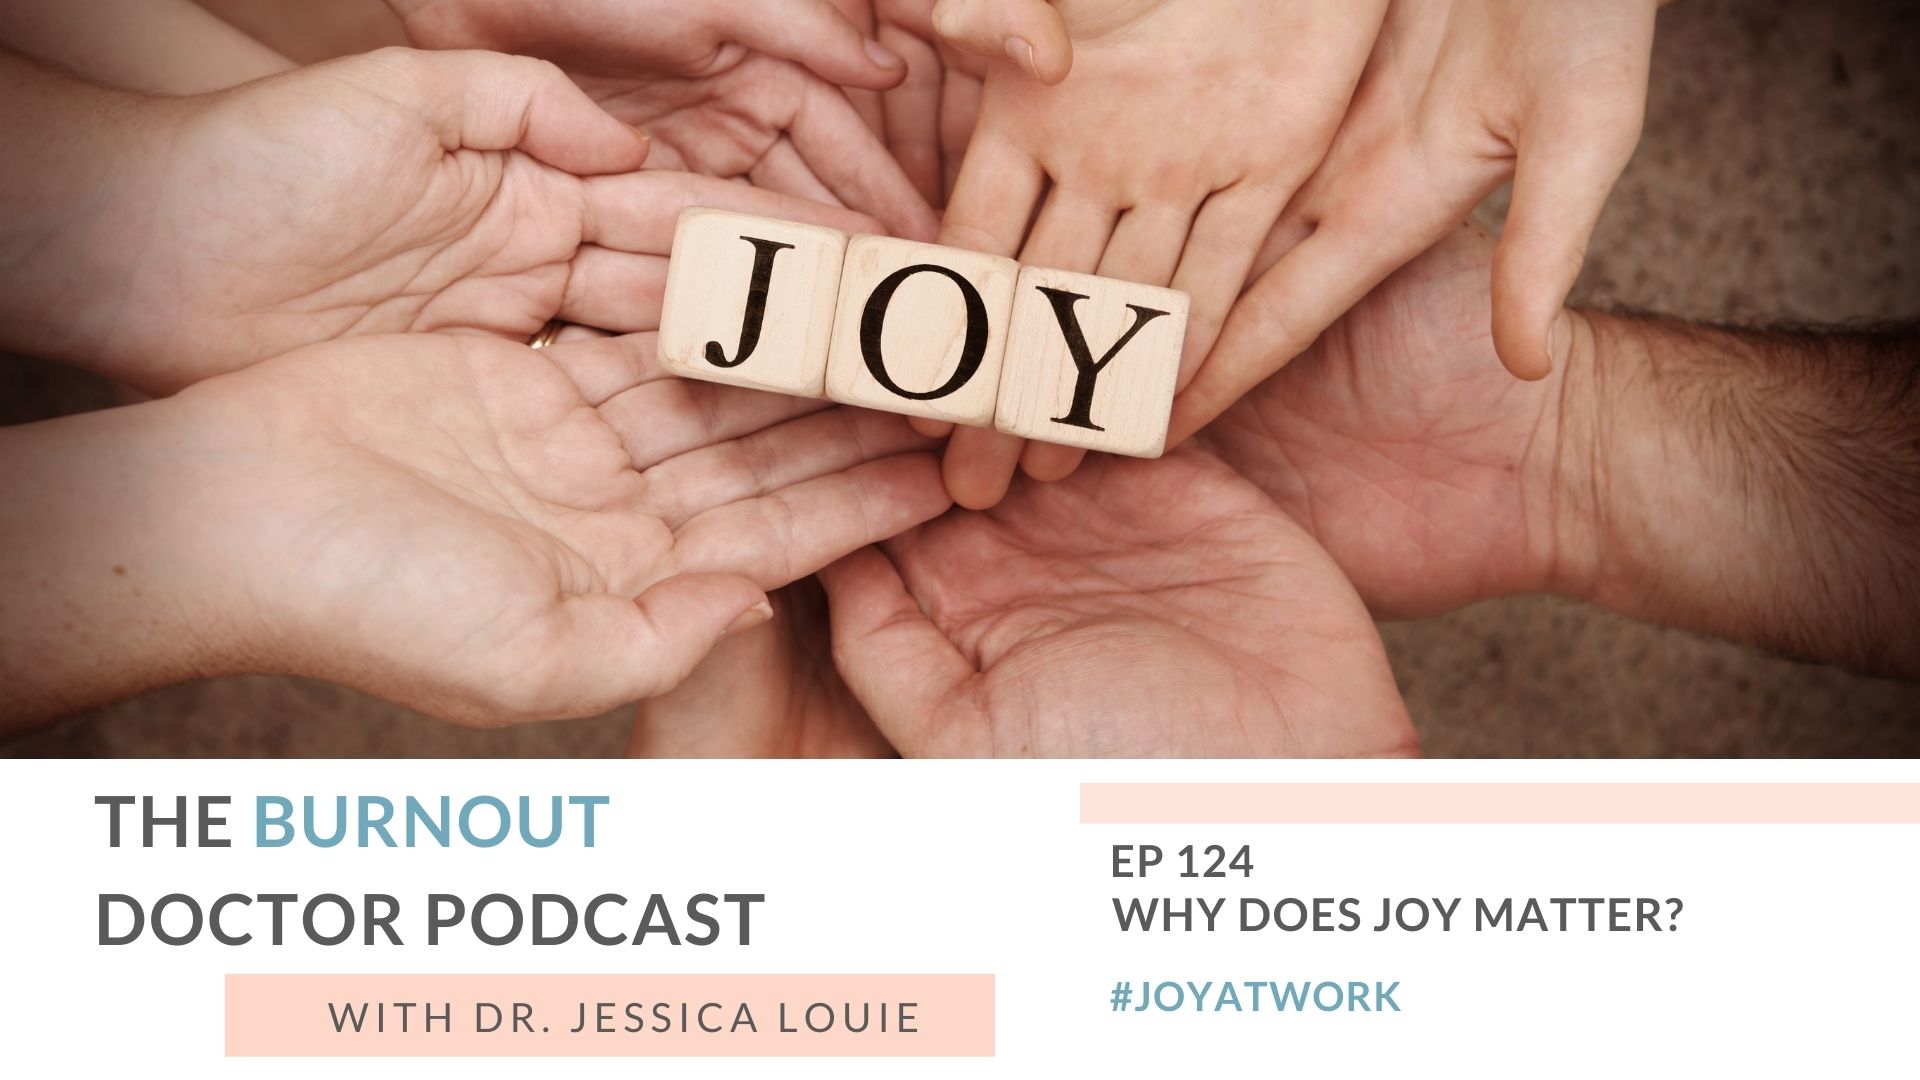 Why does joy matter? Do we need to have joy at work? Joy at Work course by Dr. Jessica Louie. How to cultivate joy at work. Pharmacist burnout keynote speaker.